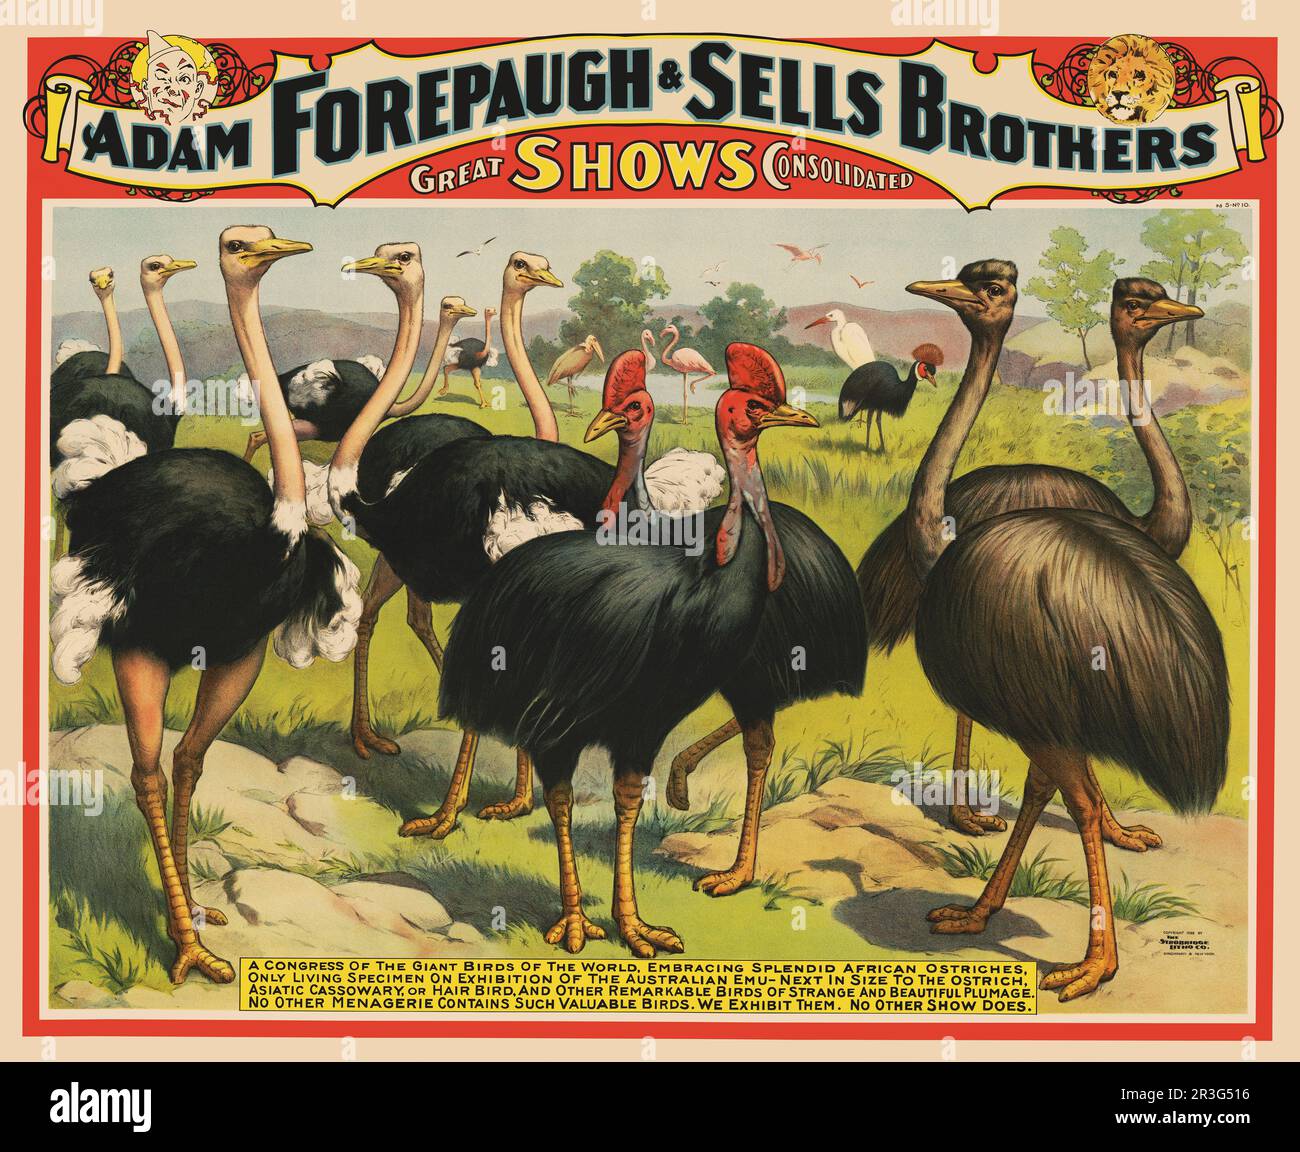 Vintage circus poster for Adam Forepaugh & Sells Brothers, showing ostriches and other large birds. Stock Photo